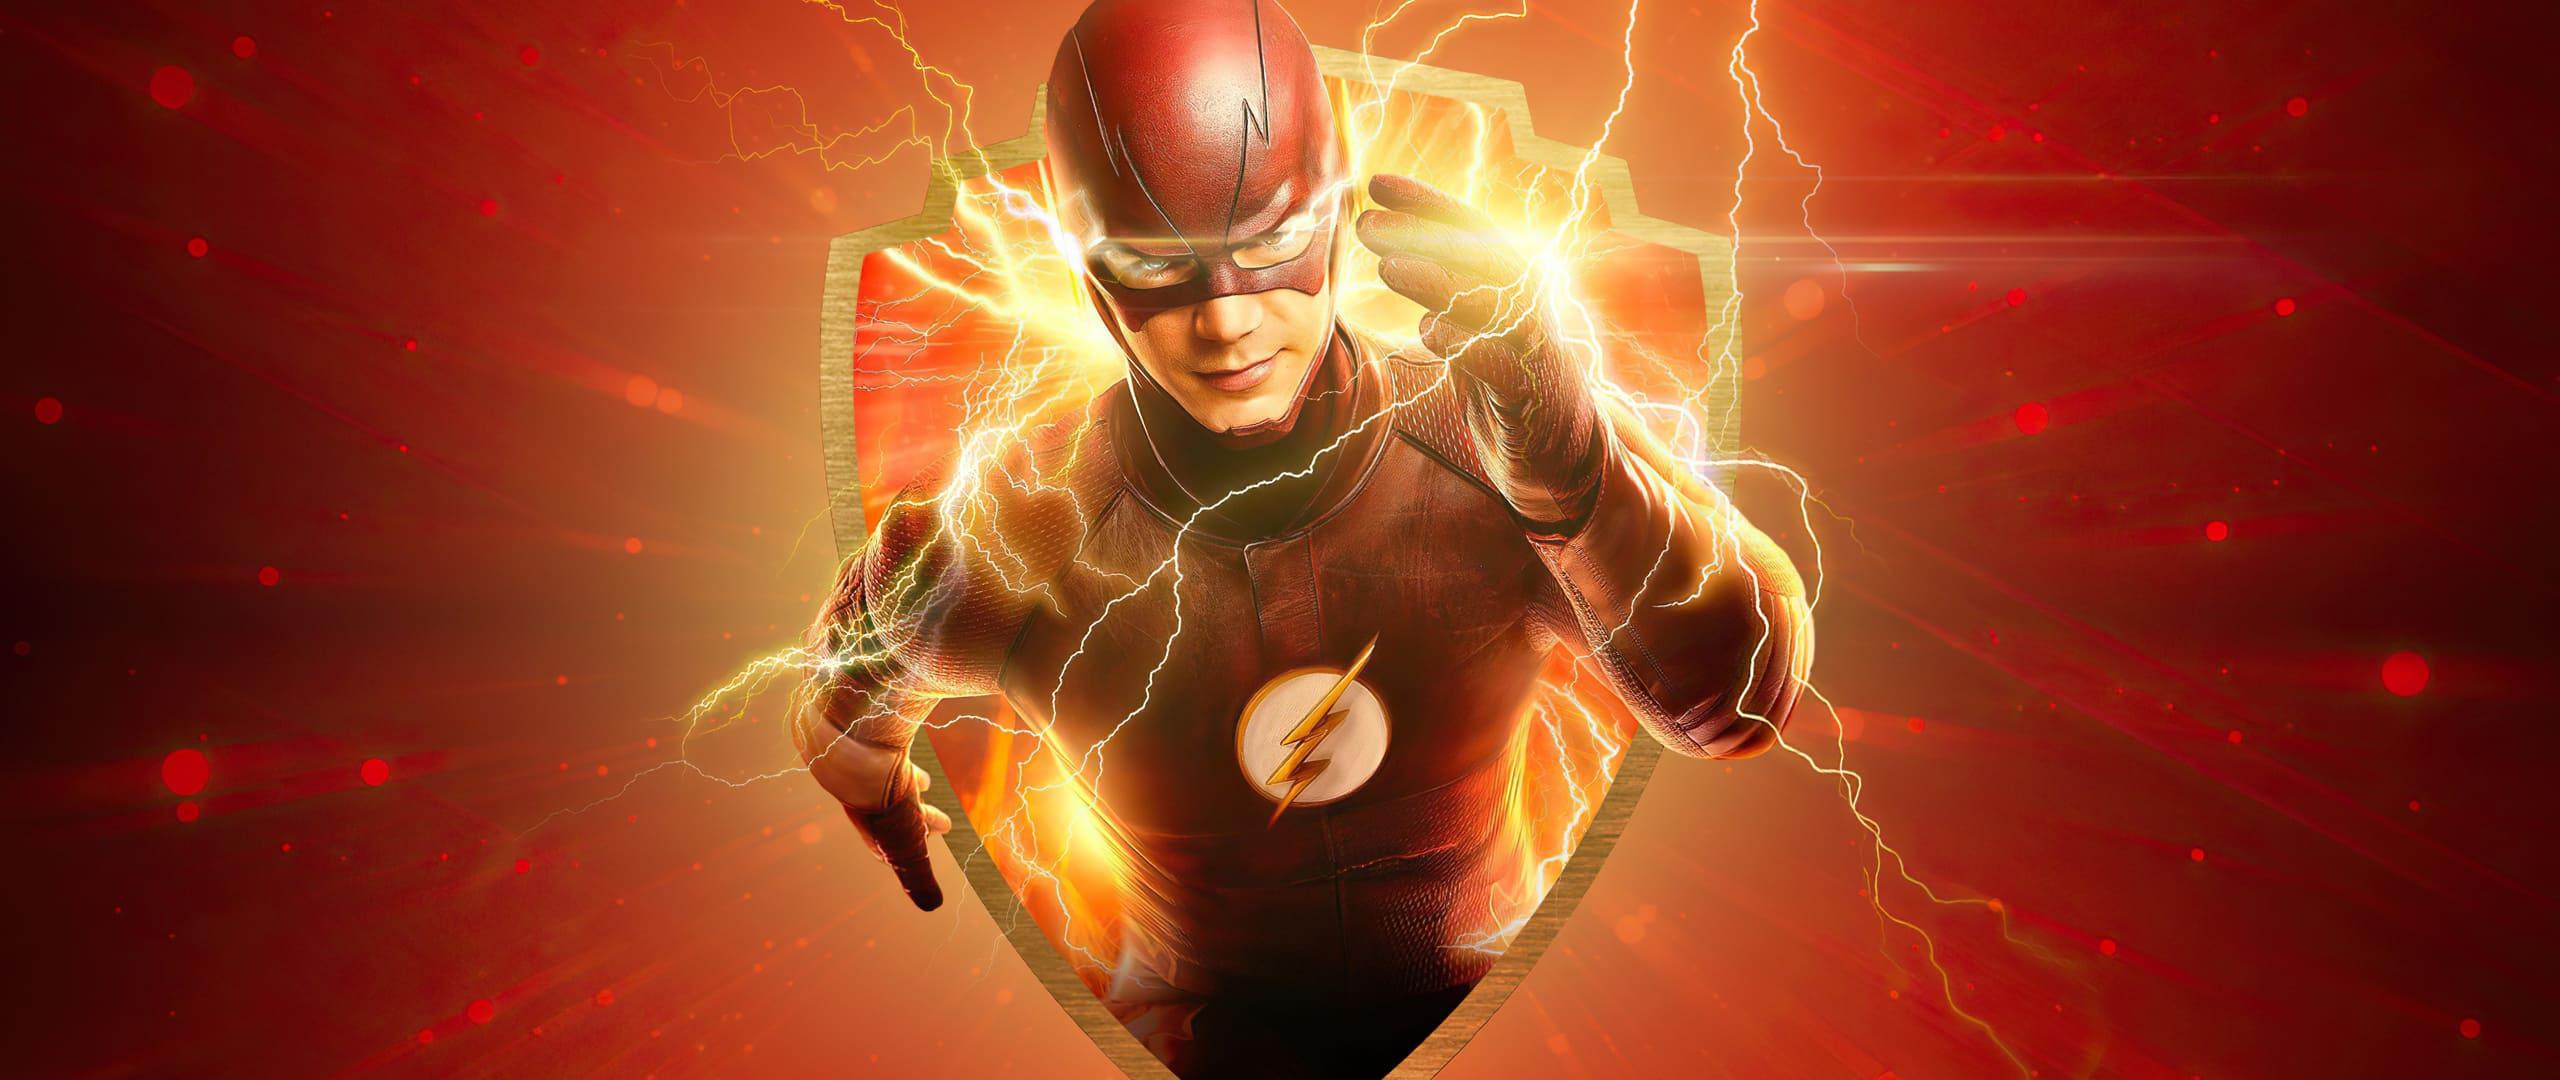 The Flash Computer Wallpapers - Top Free The Flash Computer Backgrounds ...